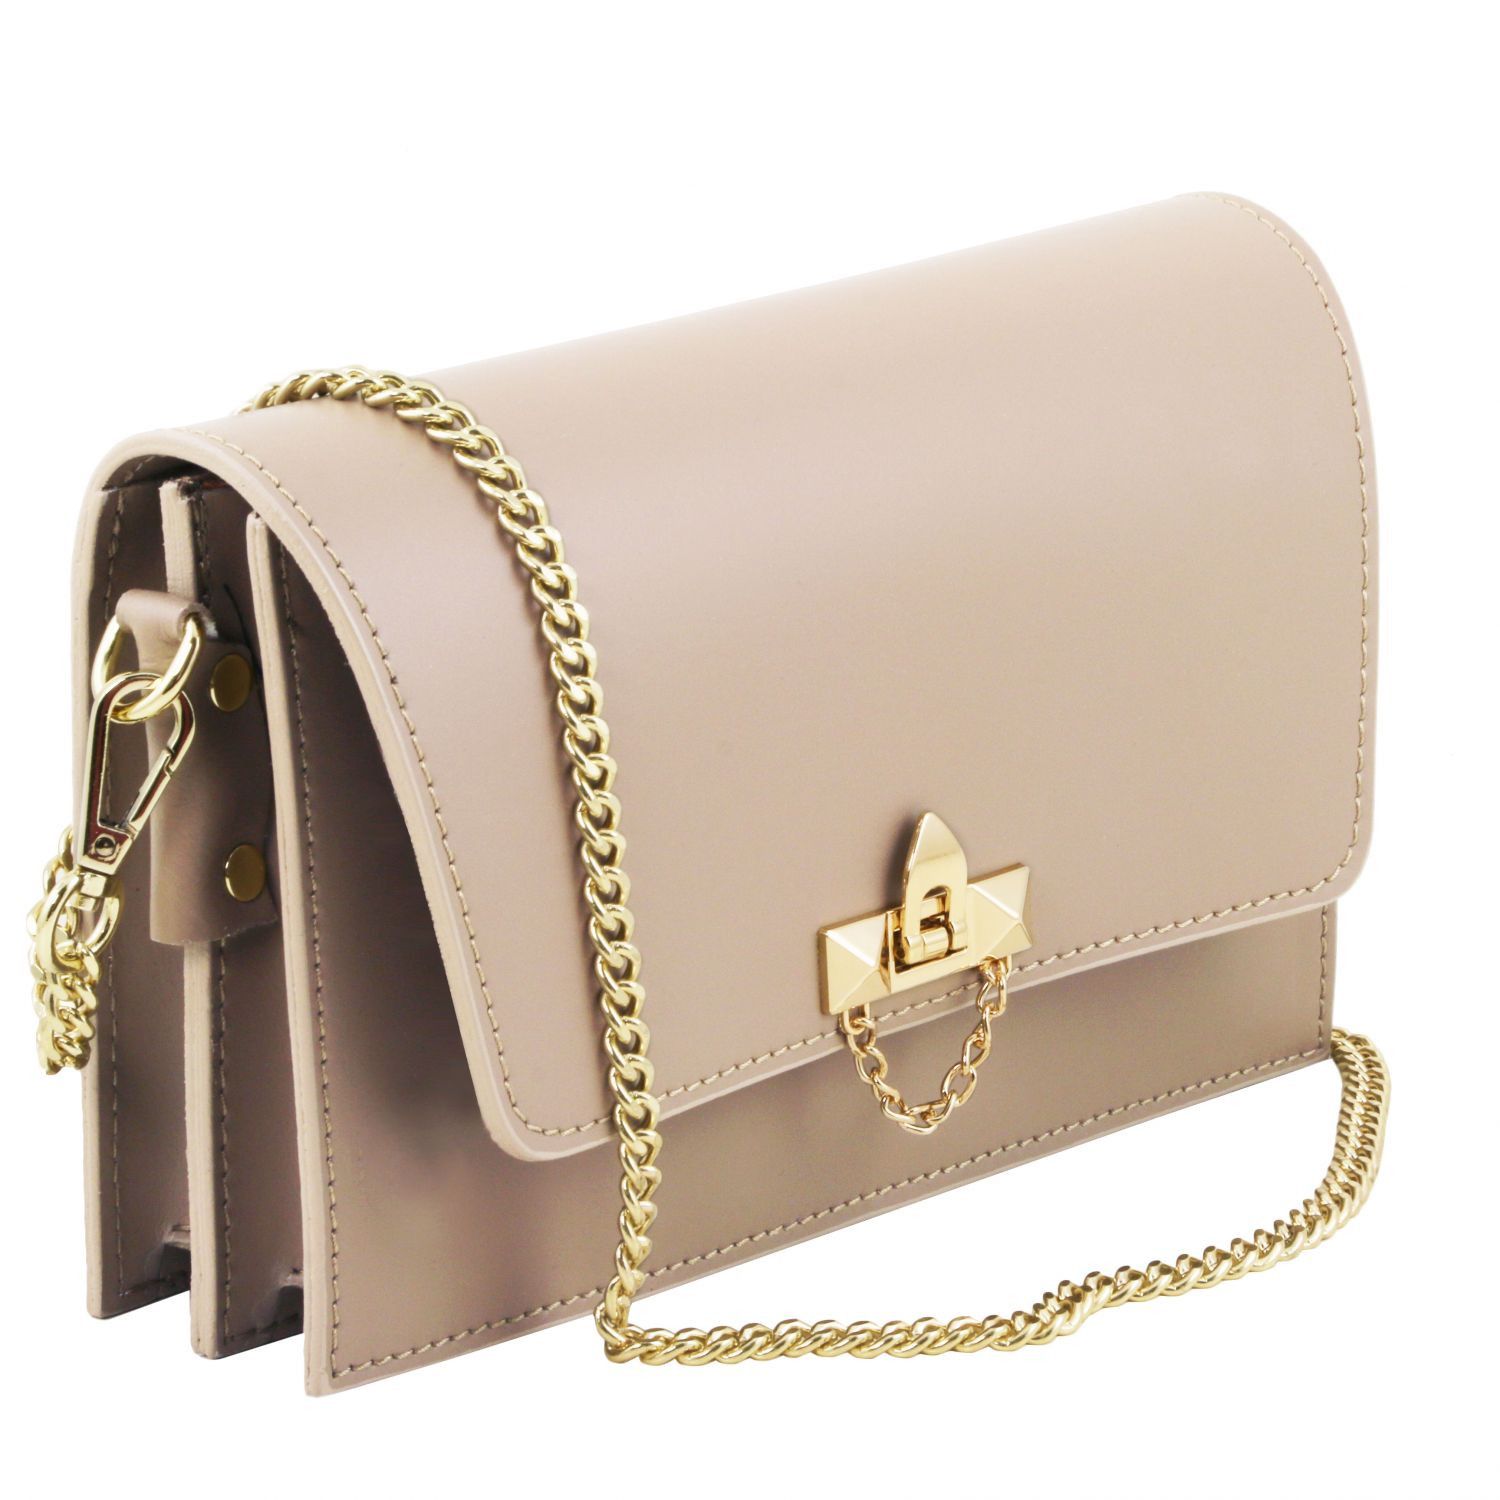 TL Bag Ruga Leather Clutch With Chain Strap Light Taupe TL141653